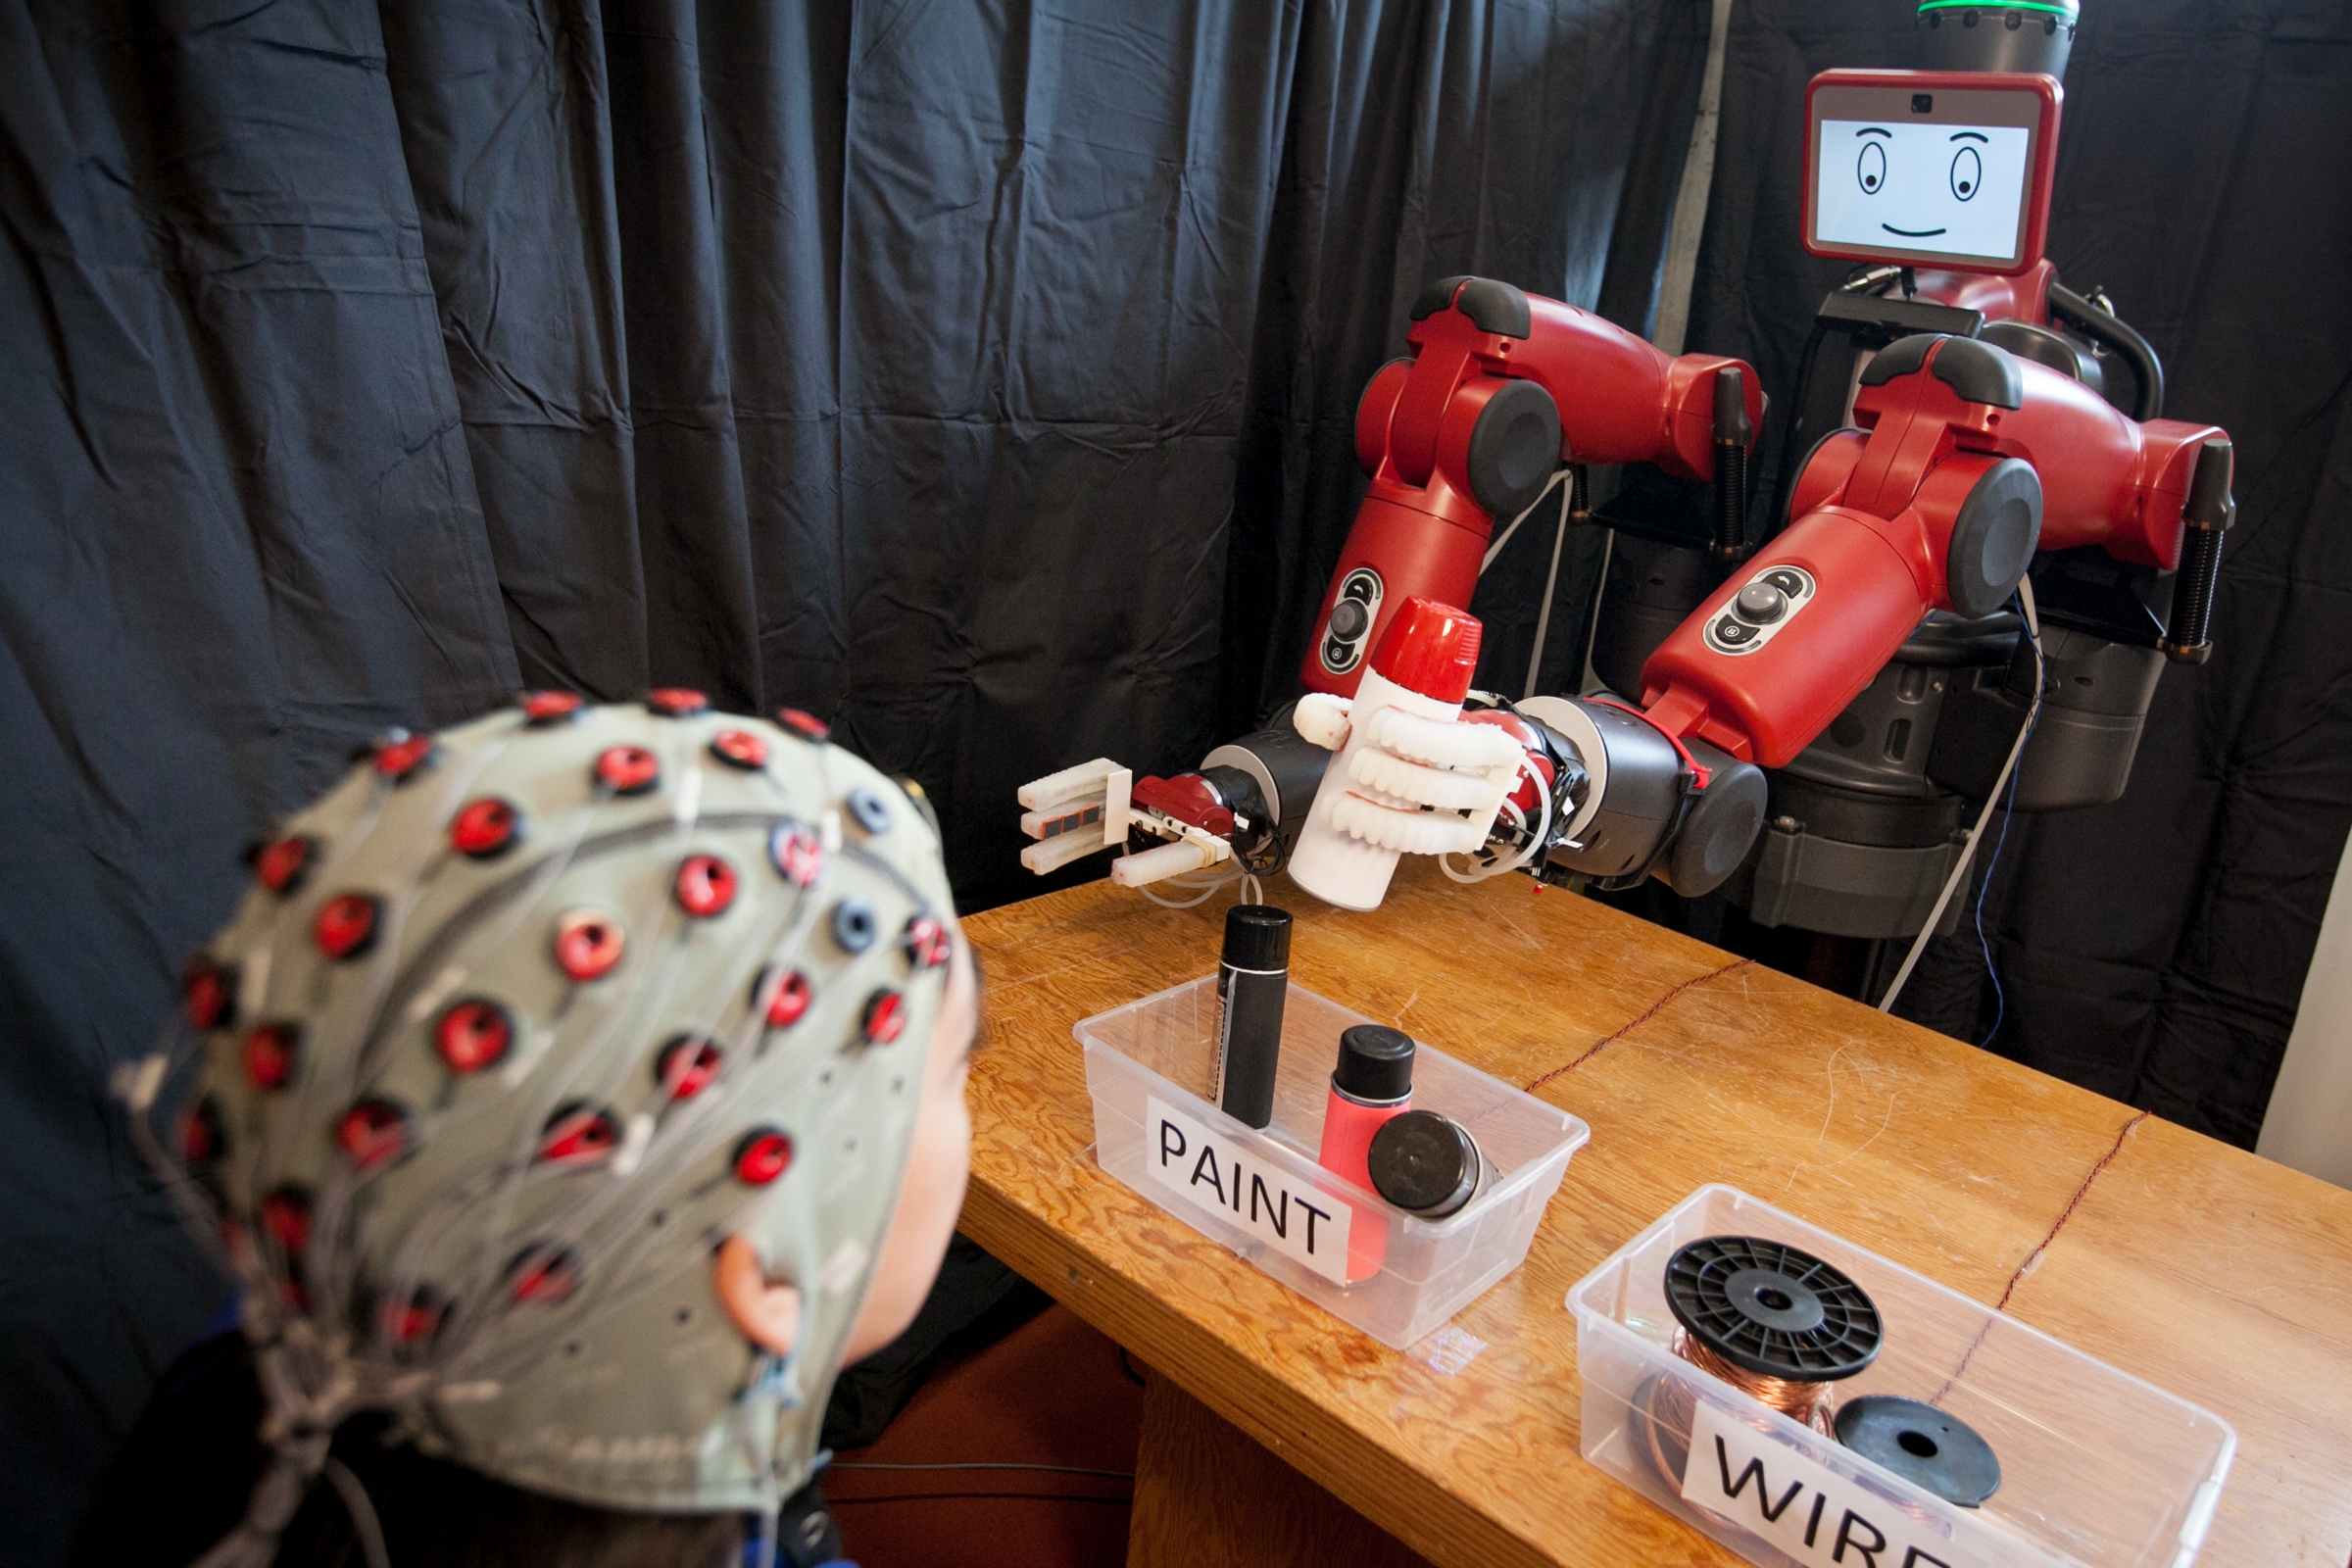 Brain signals from a human supervisor are used to correct robot mistakes in real time